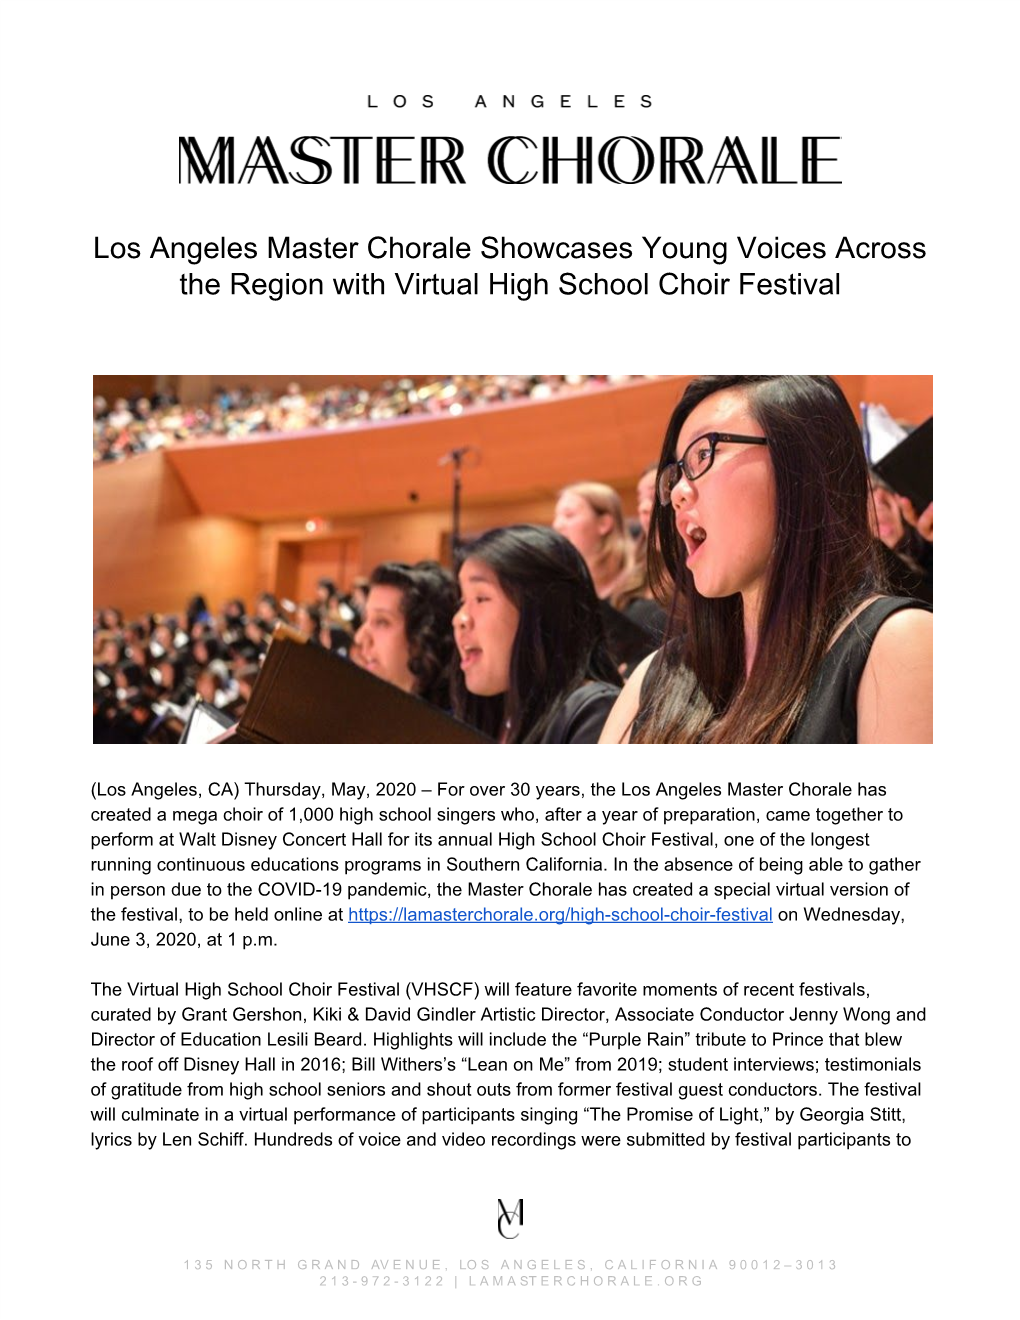 Los Angeles Master Chorale Showcases Young Voices Across the Region with Virtual High School Choir Festival